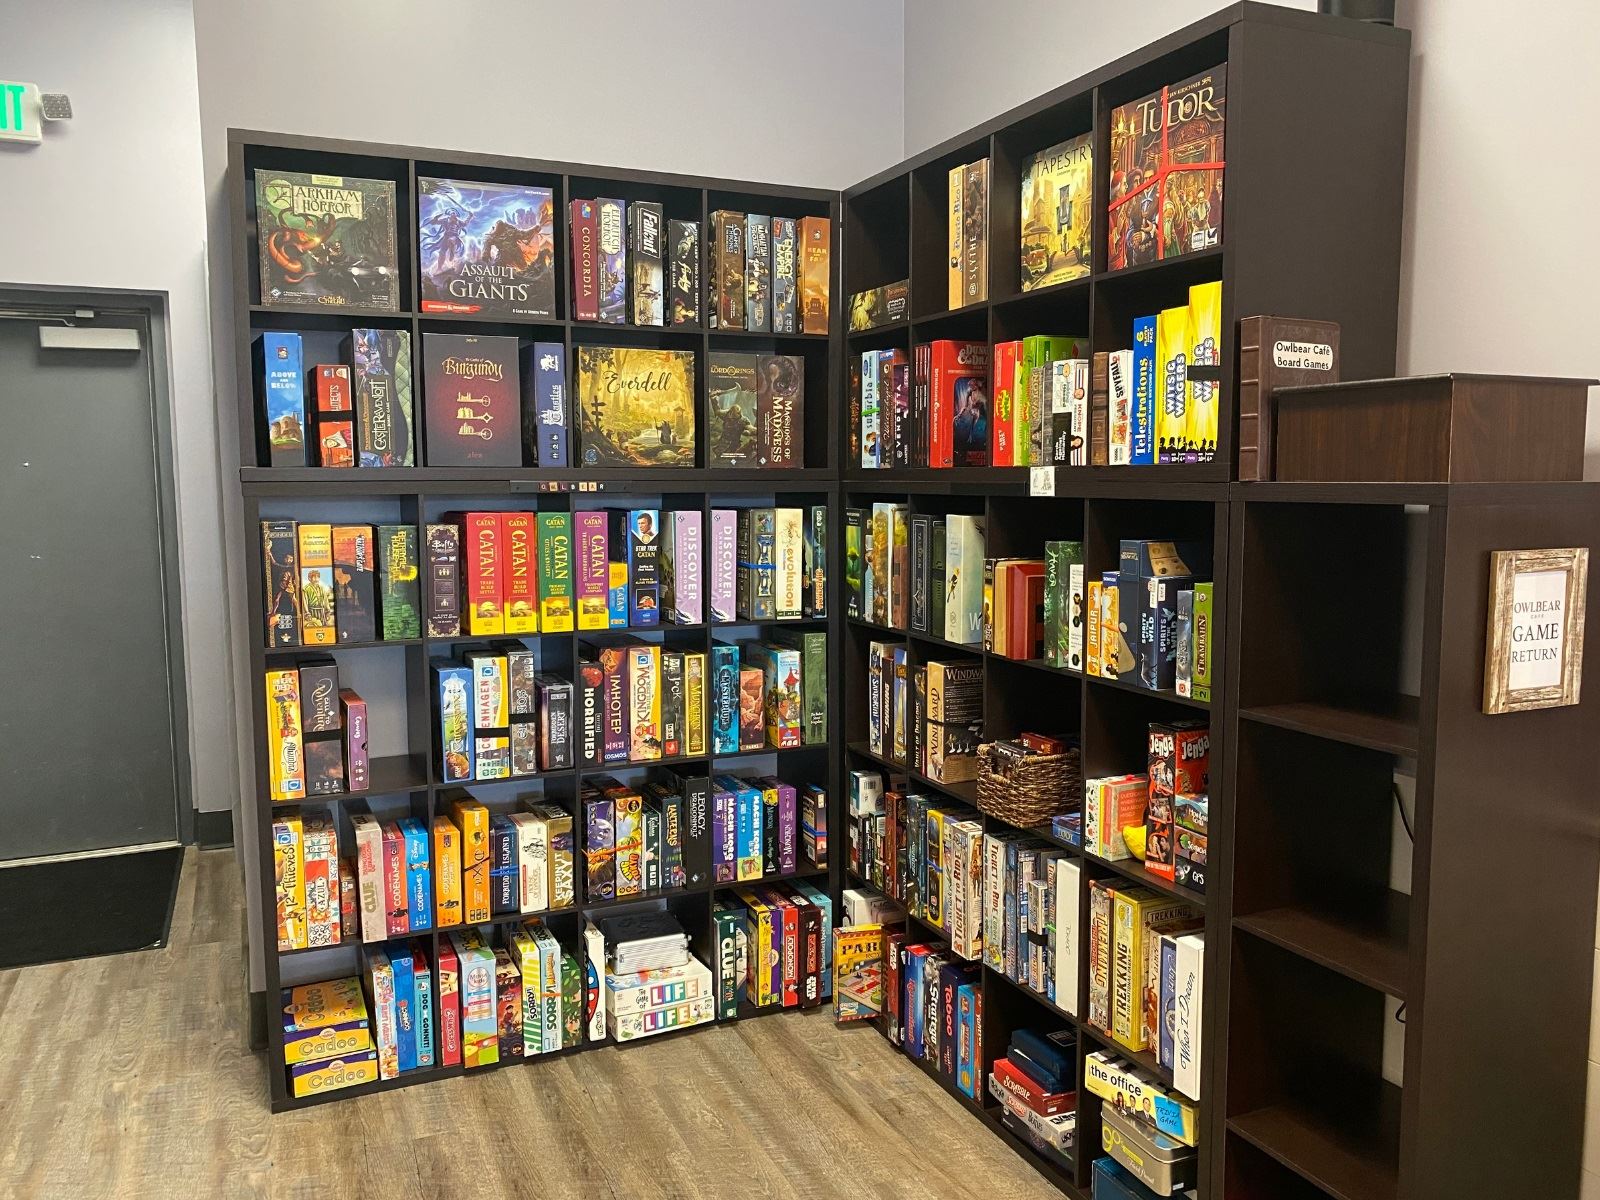 The Owlbear Cafe has more than 200 boardgames for patrons to play while they gather and eat. (Photo/Provided)